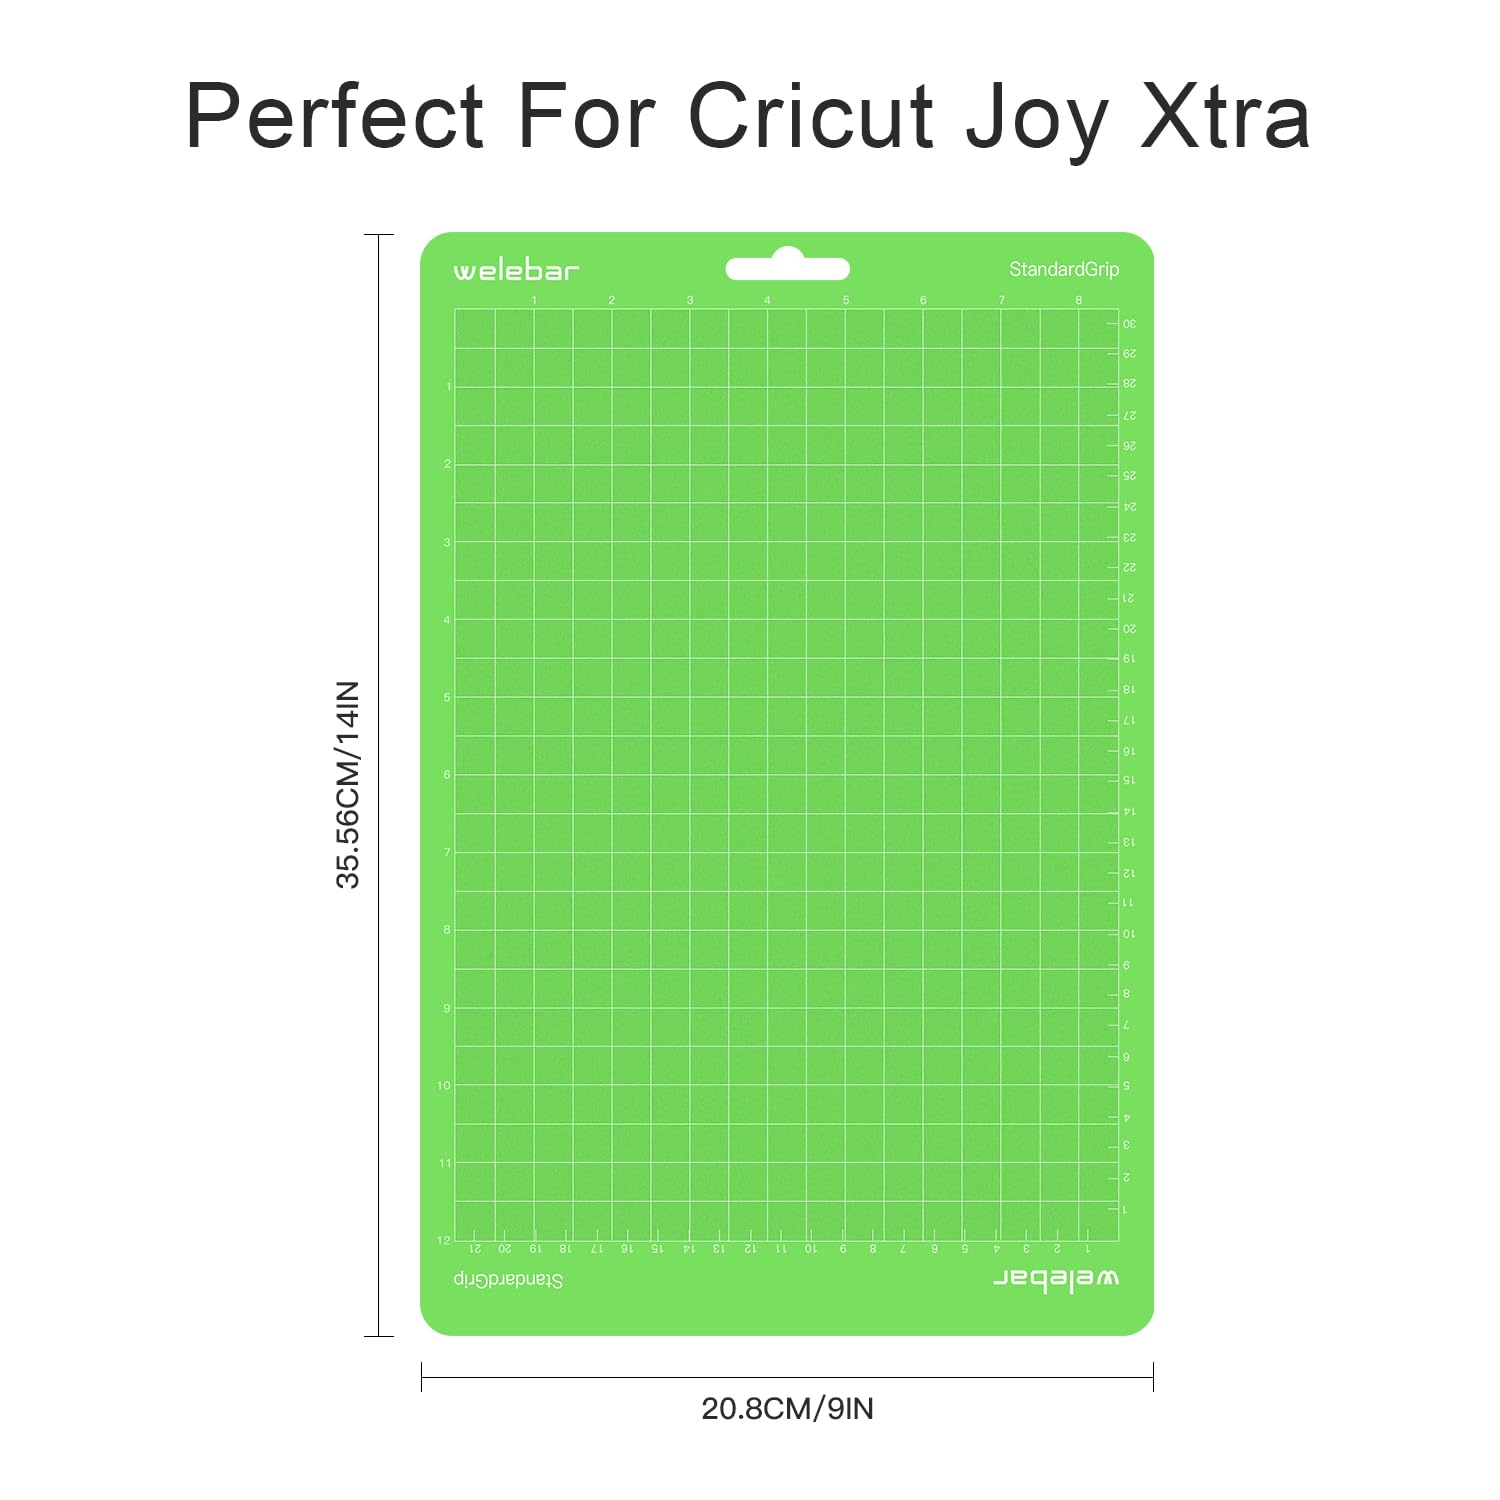 Welebar 8.5"x12" Cutting Mats for Cricut Joy Xtra, 3 Pack Standard Adhesive Non-Slip Cut Mat for Sewing Quilting Crafts